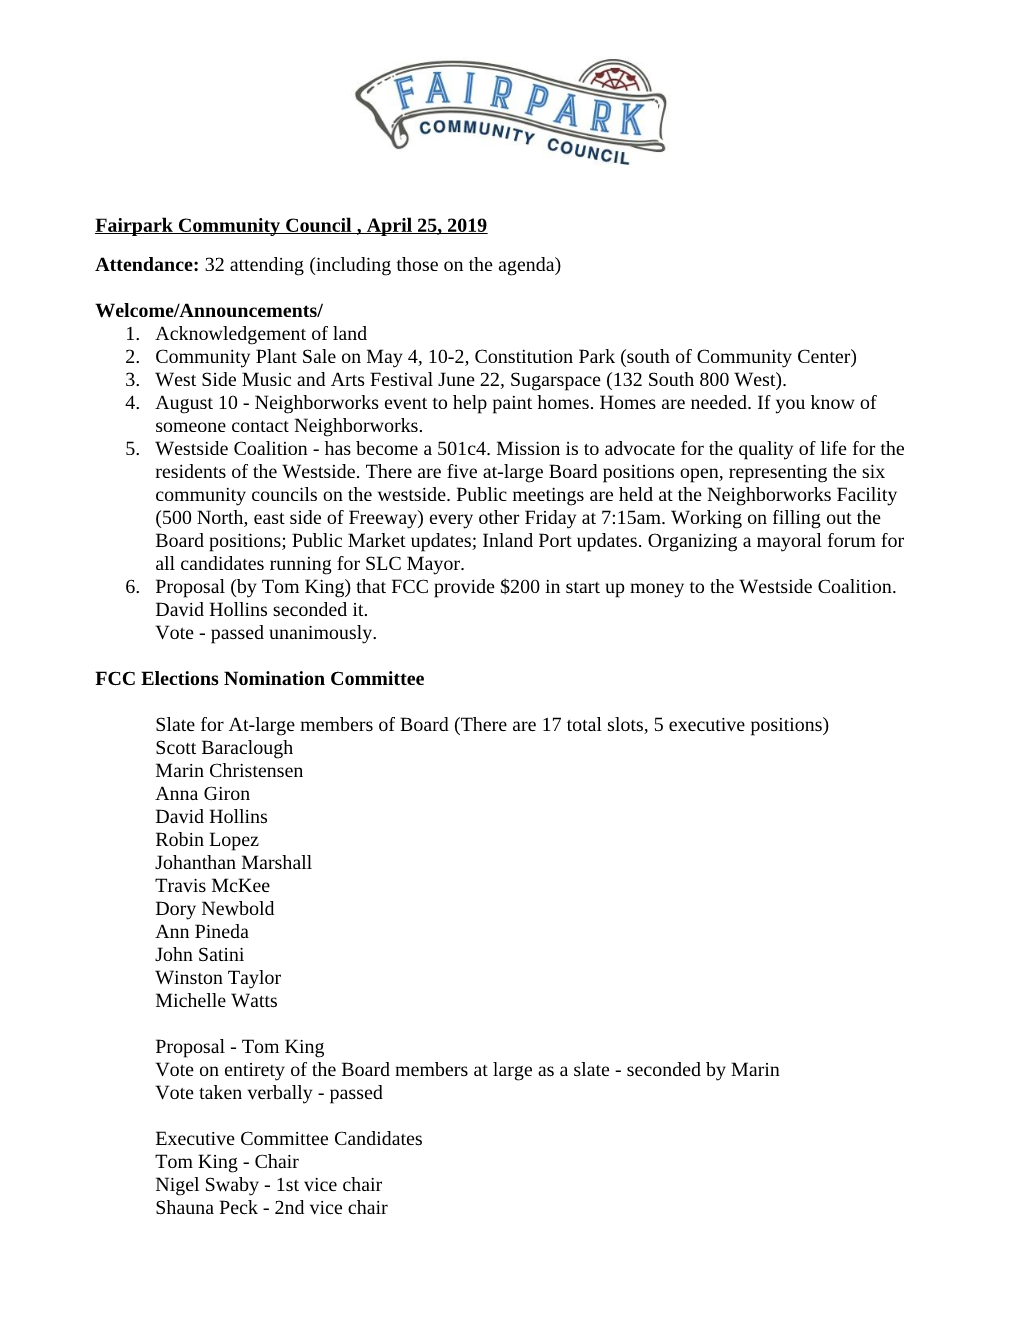 Fairpark Community Council , April 25, 2019 Attendance: 32 Attending (Including Those on the Agenda)